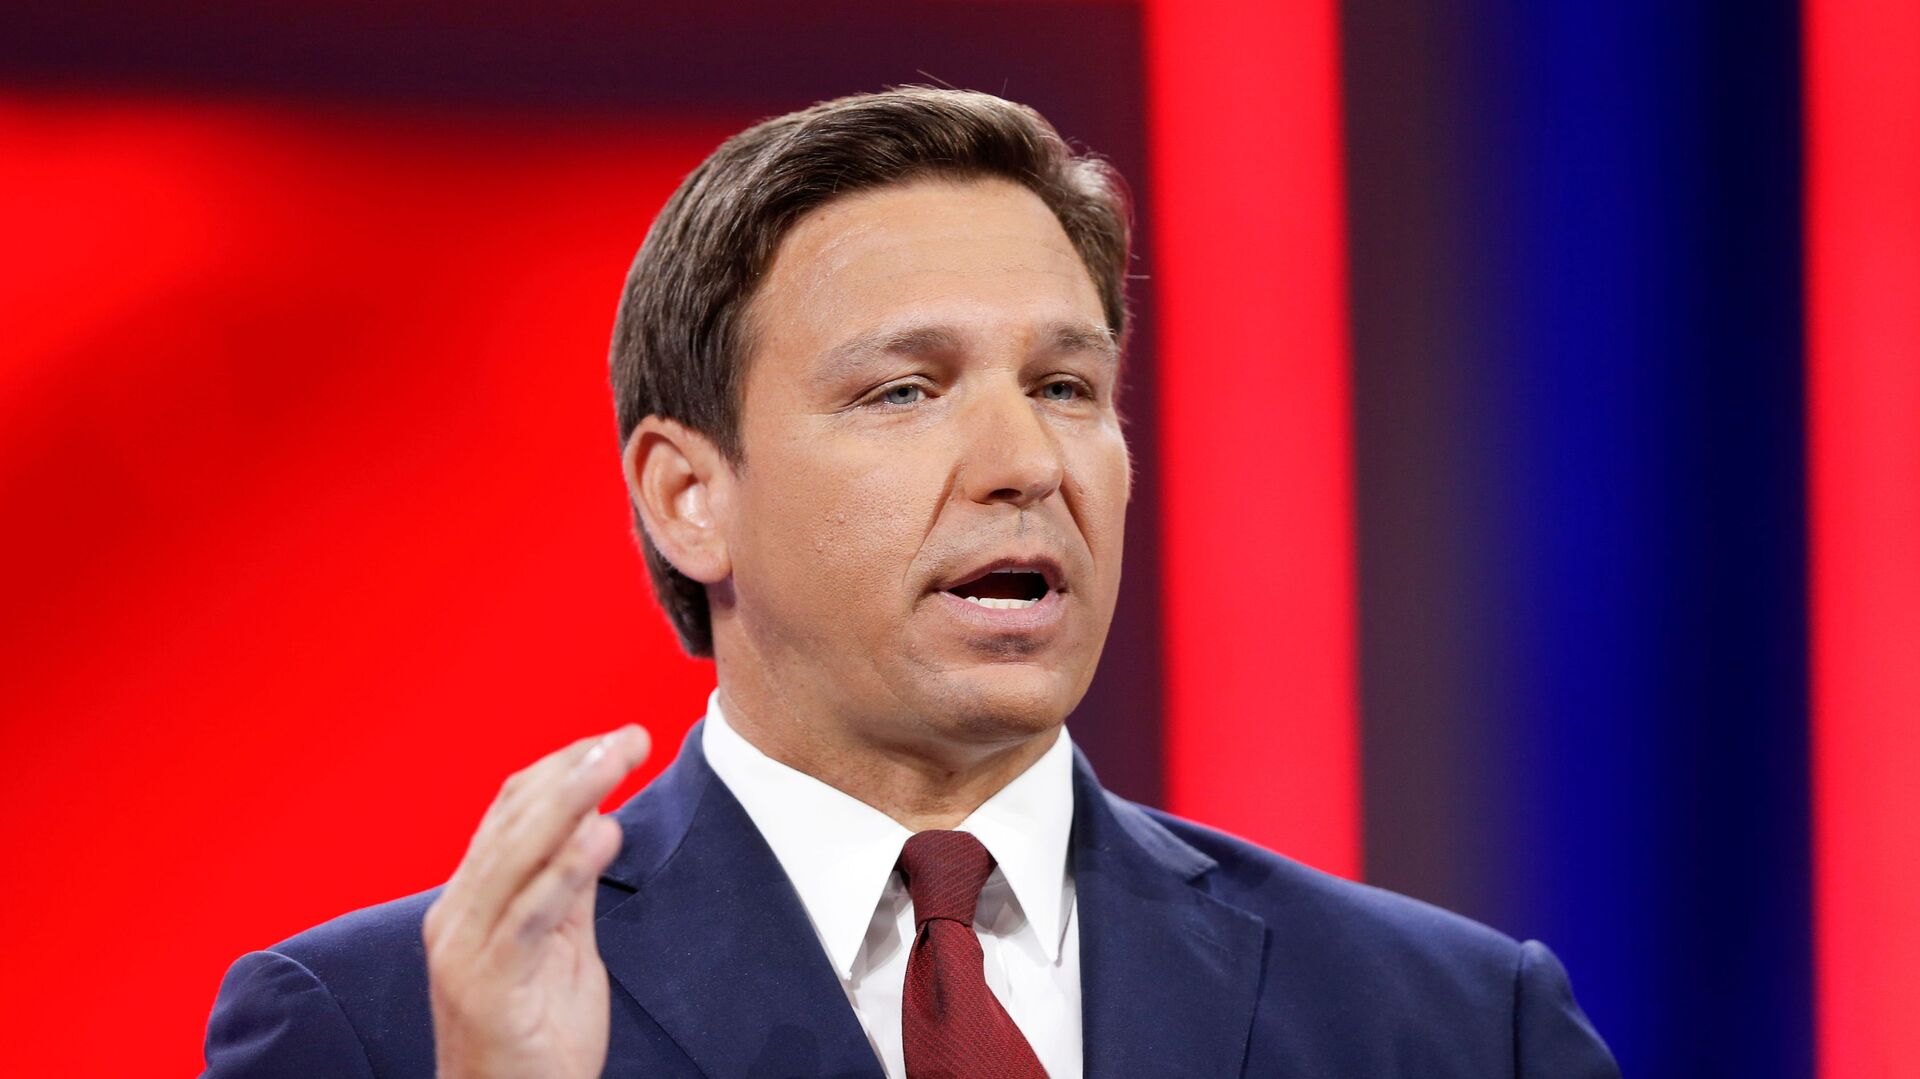 Florida Gov. Ron DeSantis speaks during the welcome segment of the Conservative Political Action Conference (CPAC) in Orlando, Florida, U.S. February 26, 2021. - Sputnik International, 1920, 17.09.2021